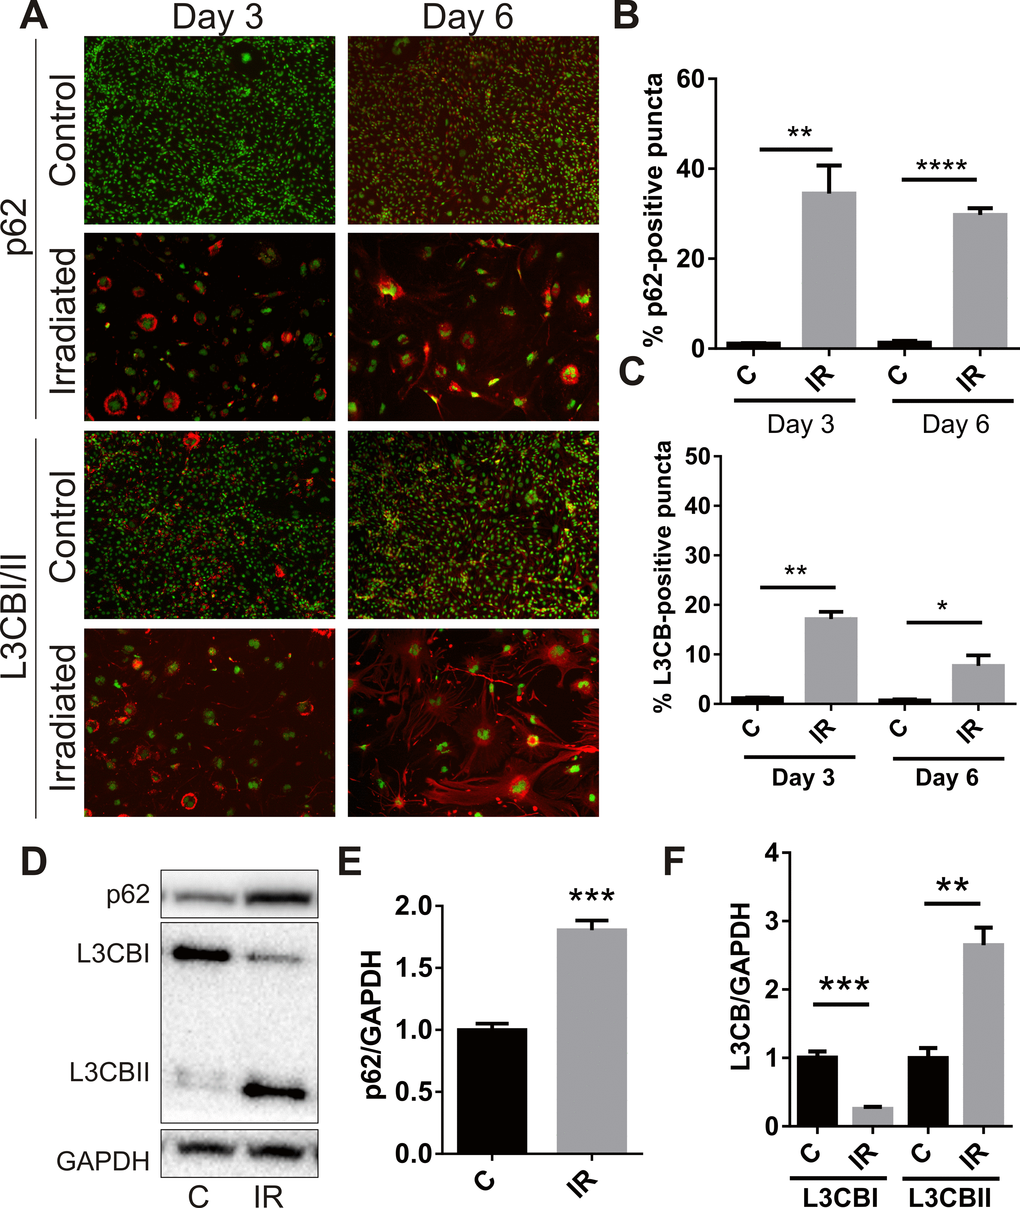 Radiation stimulates accumulation of autophagy-associated markers in brain endothelial cells. bEnd.3 cells were delivered a dose of 20 Gy ionizing radiation and monitored for 3–6 days. (A) Representative immunofluorescent images showing increased perinuclear p62 or L3CB-positive puncta accumulating in permeabilized cells at day 3 and day 6 post-IR or sham (red, 100× magnification). Cells were counterstained with DAPI (green). The percentage of cells positive for p62 (B) or L3CBI/II puncta (C) were quantitated using Image J (n=3 independent experiments; positive cells were counted in n=8 fields of view). (D) Representative western blots of p62, L3CBI and II autophagosomal markers in whole cell lysates of control and irradiated cells after 6 days. (E) and (F) Bands were quantitated after normalization to GAPDH using Image J (n=4 independent experiments). All data are shown as mean ± SEM. Student’s t-test, *P